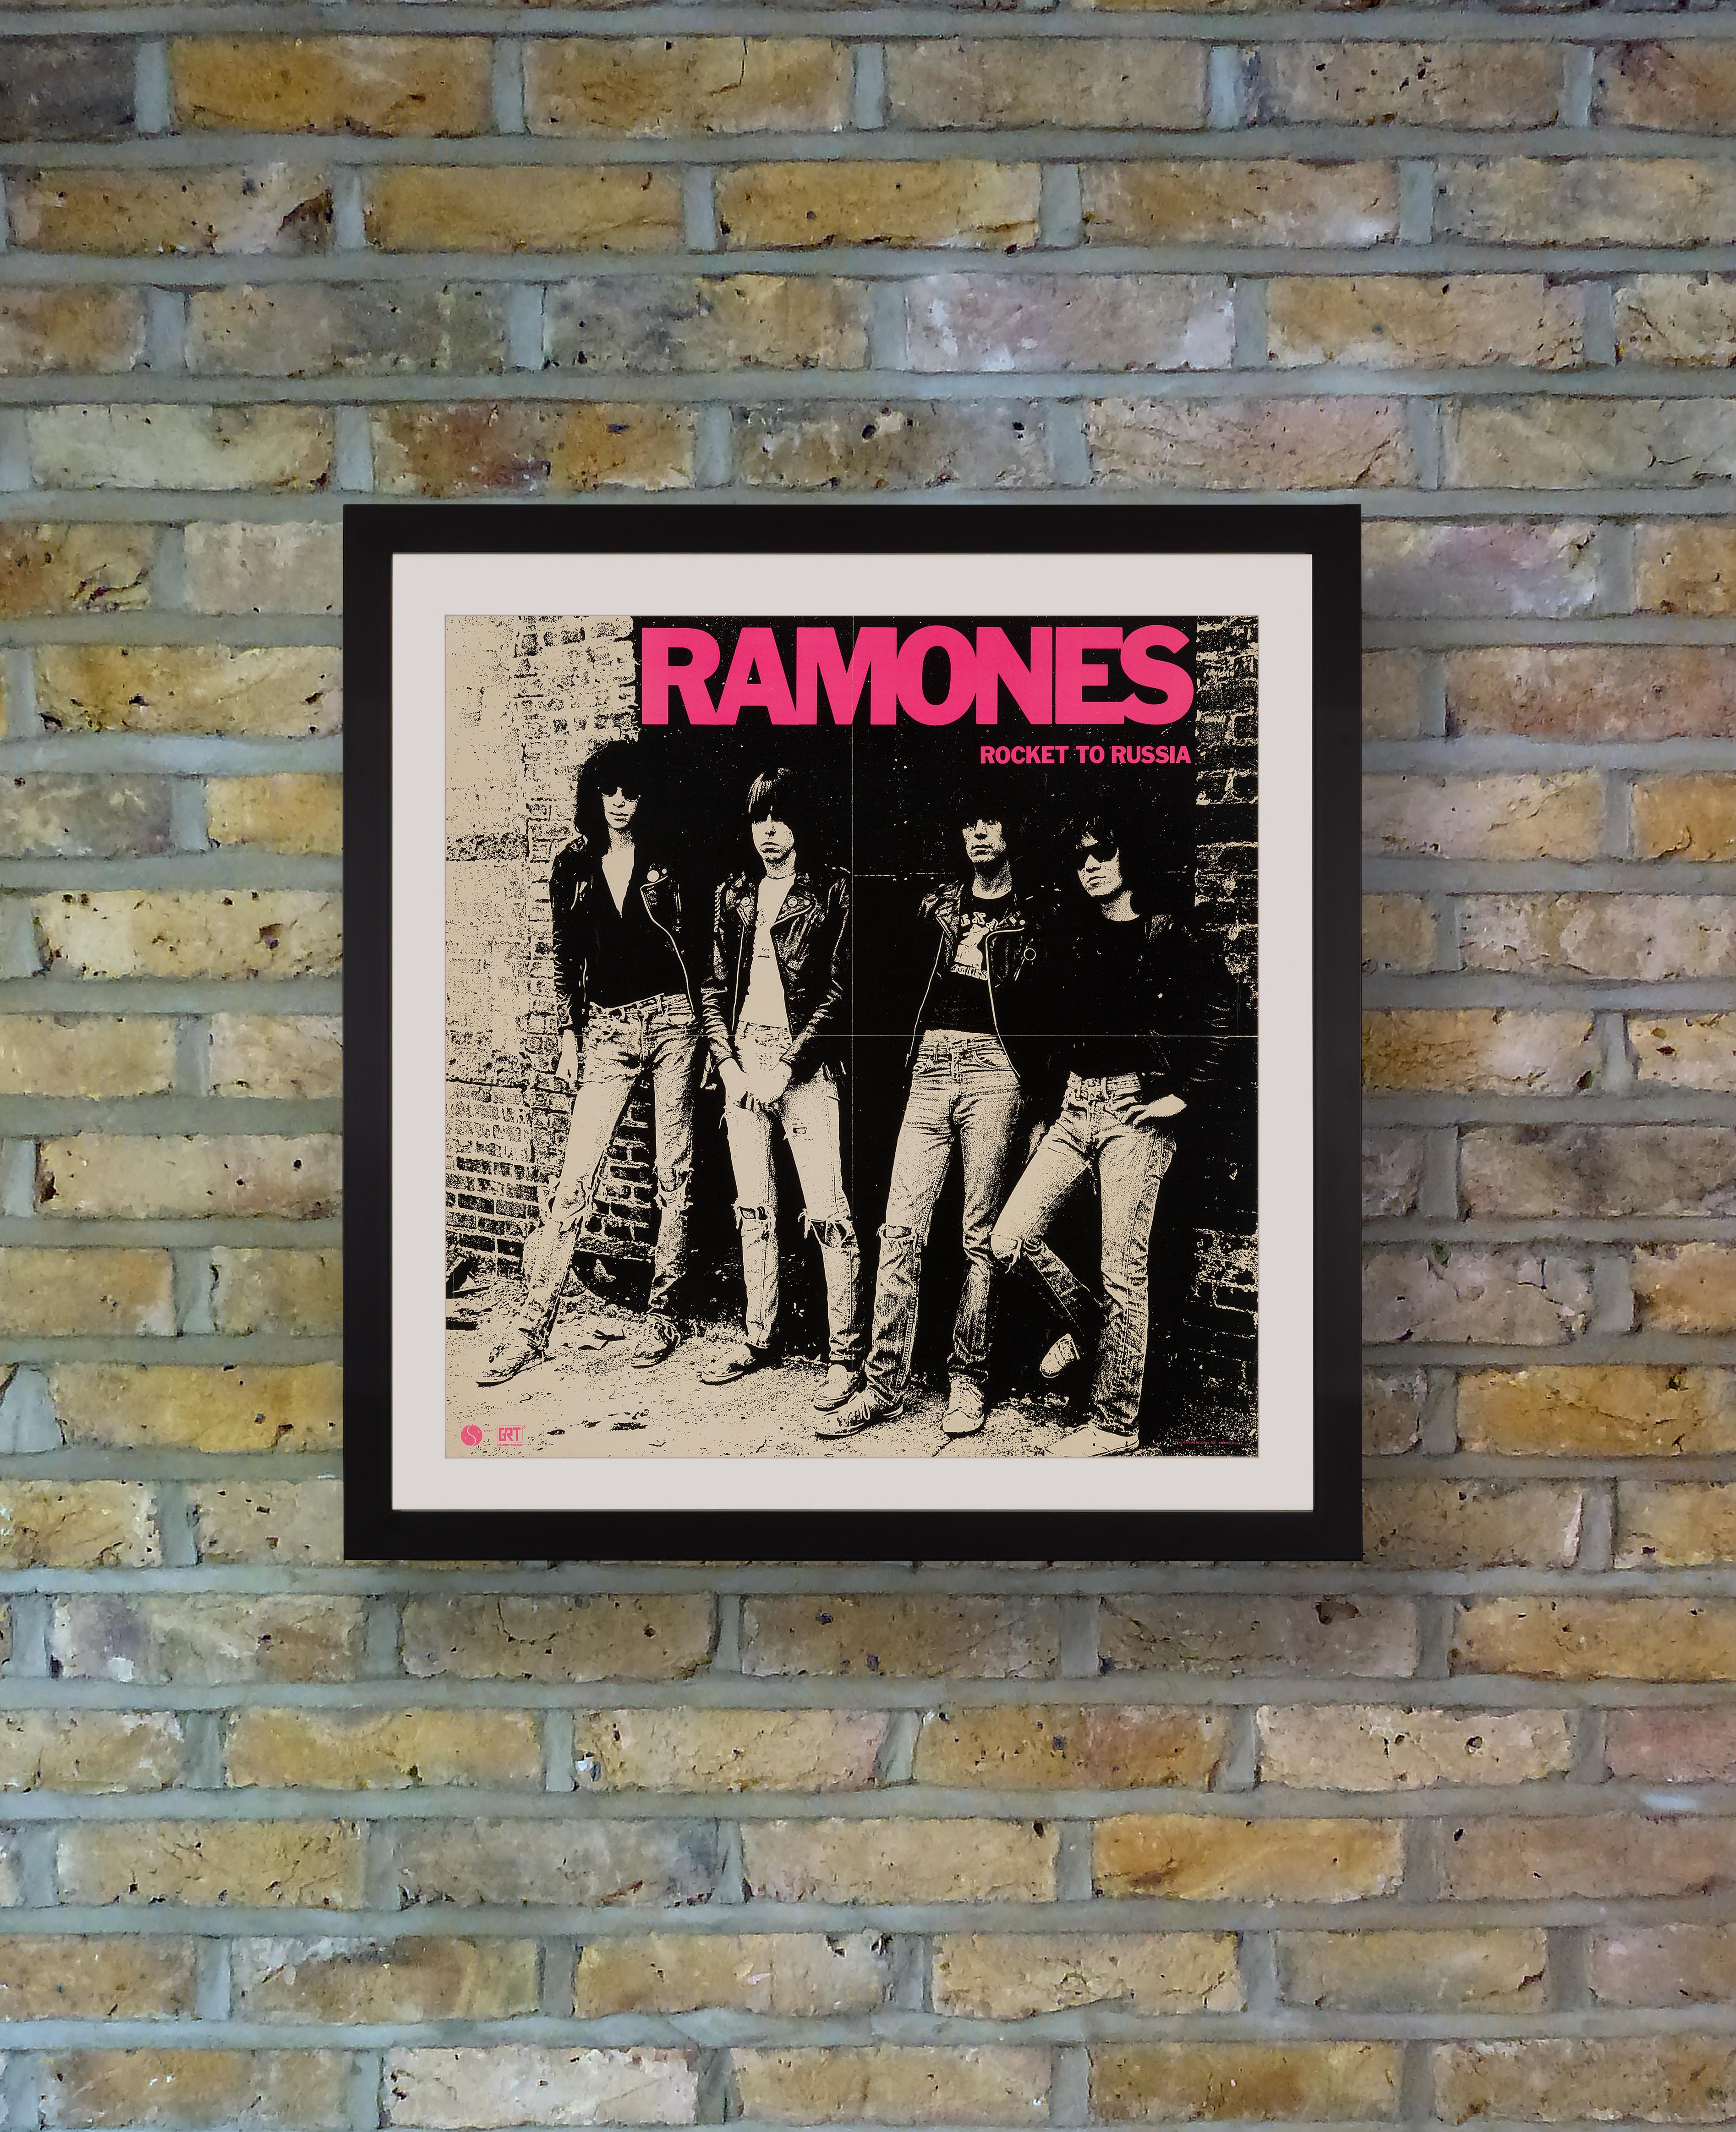 A scarce promotional poster issued by Sire Records in 1977 to support the release of the Ramones third studio album 'Rocket To Russia.' Released on 4th November 1977, 'Rocket To Russia' was the Ramones last to be recorded with all four original